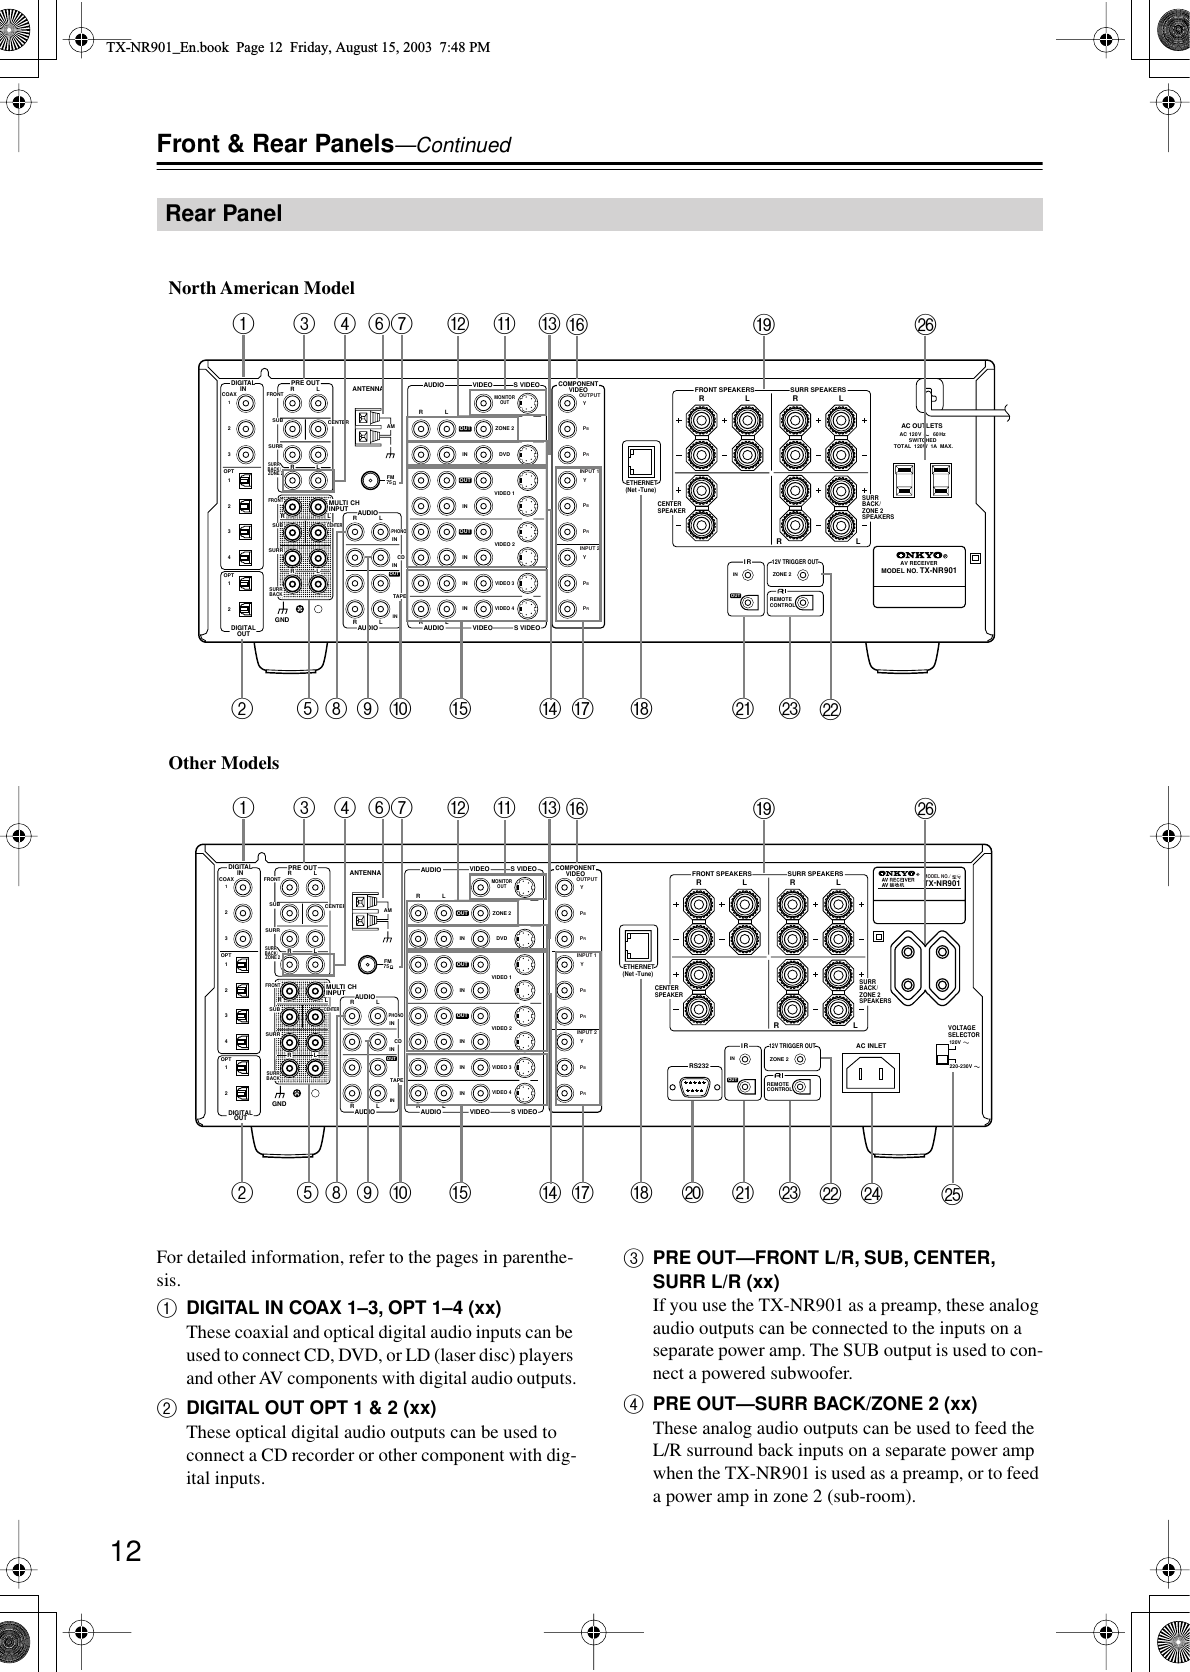 12Front &amp; Rear Panels—ContinuedFor detailed information, refer to the pages in parenthe-sis.ADIGITAL IN COAX 1–3, OPT 1–4 (xx)These coaxial and optical digital audio inputs can be used to connect CD, DVD, or LD (laser disc) players and other AV components with digital audio outputs.BDIGITAL OUT OPT 1 &amp; 2 (xx)These optical digital audio outputs can be used to connect a CD recorder or other component with dig-ital inputs.CPRE OUT—FRONT L/R, SUB, CENTER, SURR L/R (xx)If you use the TX-NR901 as a preamp, these analog audio outputs can be connected to the inputs on a separate power amp. The SUB output is used to con-nect a powered subwoofer.DPRE OUT—SURR BACK/ZONE 2 (xx)These analog audio outputs can be used to feed the L/R surround back inputs on a separate power amp when the TX-NR901 is used as a preamp, or to feed a power amp in zone 2 (sub-room).Rear PanelFM75OUTOUTOUTOUTLOUTPHONODIGITALINPRE OUTDIGITALOUTOPTOPT2123412FRONTSUBSURRRLAUDIORLCDTAPERLAUDIO VIDEO  S VIDEOMONITOROUTRLINININININININZONE 2DVDVIDEO 1VIDEO 2VIDEO 3VIDEO 4AUDIO AUDIO VIDEO  S VIDEO13GNDSURR BACK/  ZONE 2RLINAC INLETCOAXRZONE 2REMOTECONTROLRS232I R12V TRIGGER OUTINCENTERETHERNET(Net -Tune)RLMULTI CHINPUTFRONTSUBSURRSURRBACKCENTERRLAMANTENNACOMPONENTVIDEOYPBPROUTPUTINPUT 1YPBPRINPUT 2YPBPRVOLTAGESELECTOR220-230V120VTX-NR901MODEL NO. / SURRBACK/ ZONE 2SPEAKERSFRONT SPEAKERS LRL RSURR SPEAKERSCENTERSPEAKERRLFM75OUTOUTOUTOUTLOUTPHONODIGITALINPRE OUTDIGITALOUTOPTOPT2123412FRONTSUBSURRRLAUDIORLCDTAPERLAUDIO VIDEO  S VIDEOMONITOROUTRLINININININININZONE 2DVDVIDEO 1VIDEO 2VIDEO 3VIDEO 4AUDIO AUDIO VIDEO  S VIDEO13GNDSURR BACK/  ZONE 2RLINCOAXRZONE 2REMOTECONTROLI R12V TRIGGER OUTINCENTERETHERNET(Net -Tune)RLMULTI CHINPUTFRONTSUBSURRSURRBACKCENTERRLAMANTENNACOMPONENTVIDEOYPBPROUTPUTINPUT 1YPBPRINPUT 2YPBPRAC OUTLETSAC 120 V        60 HzSWITCHED TOTAL  120W  1A  MAX.AV RECEIVERMODEL NO. TX-NR 901SURRBACK/ ZONE 2SPEAKERSFRONT SPEAKERS LRL RSURR SPEAKERSCENTERSPEAKERRLTUVWXYZSRQPONB1CDEFGHIJUVWZSRQPONB1CDEFGHIJKL MKL MNorth American ModelOther ModelsTX-NR901_En.book  Page 12  Friday, August 15, 2003  7:48 PM